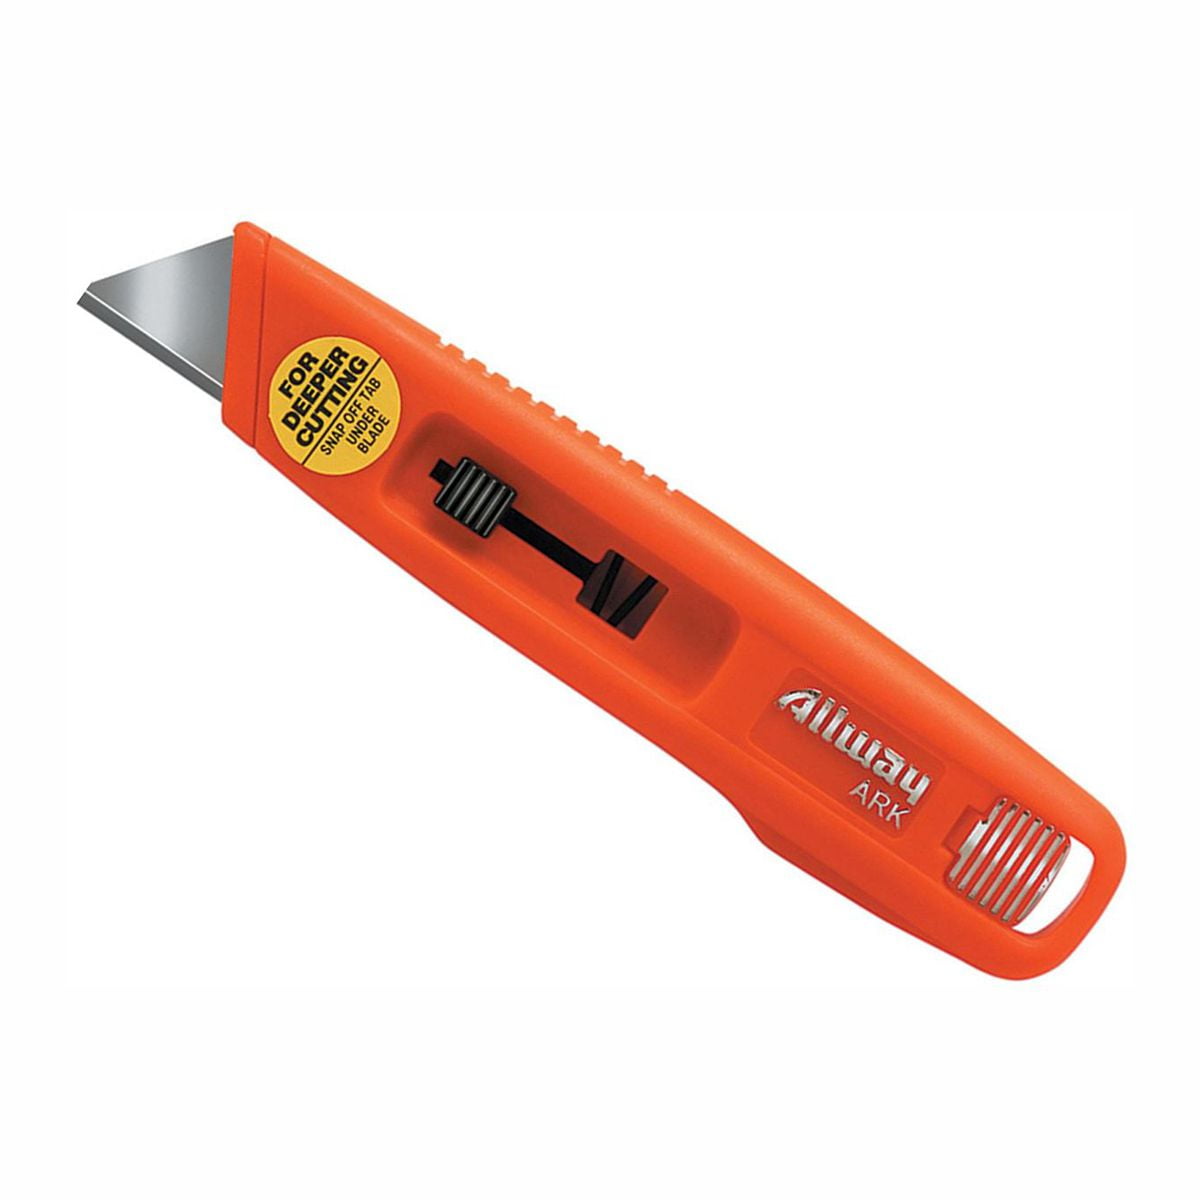 SCIMAKER Safety Box Cutter Utility knife Double-sided blade